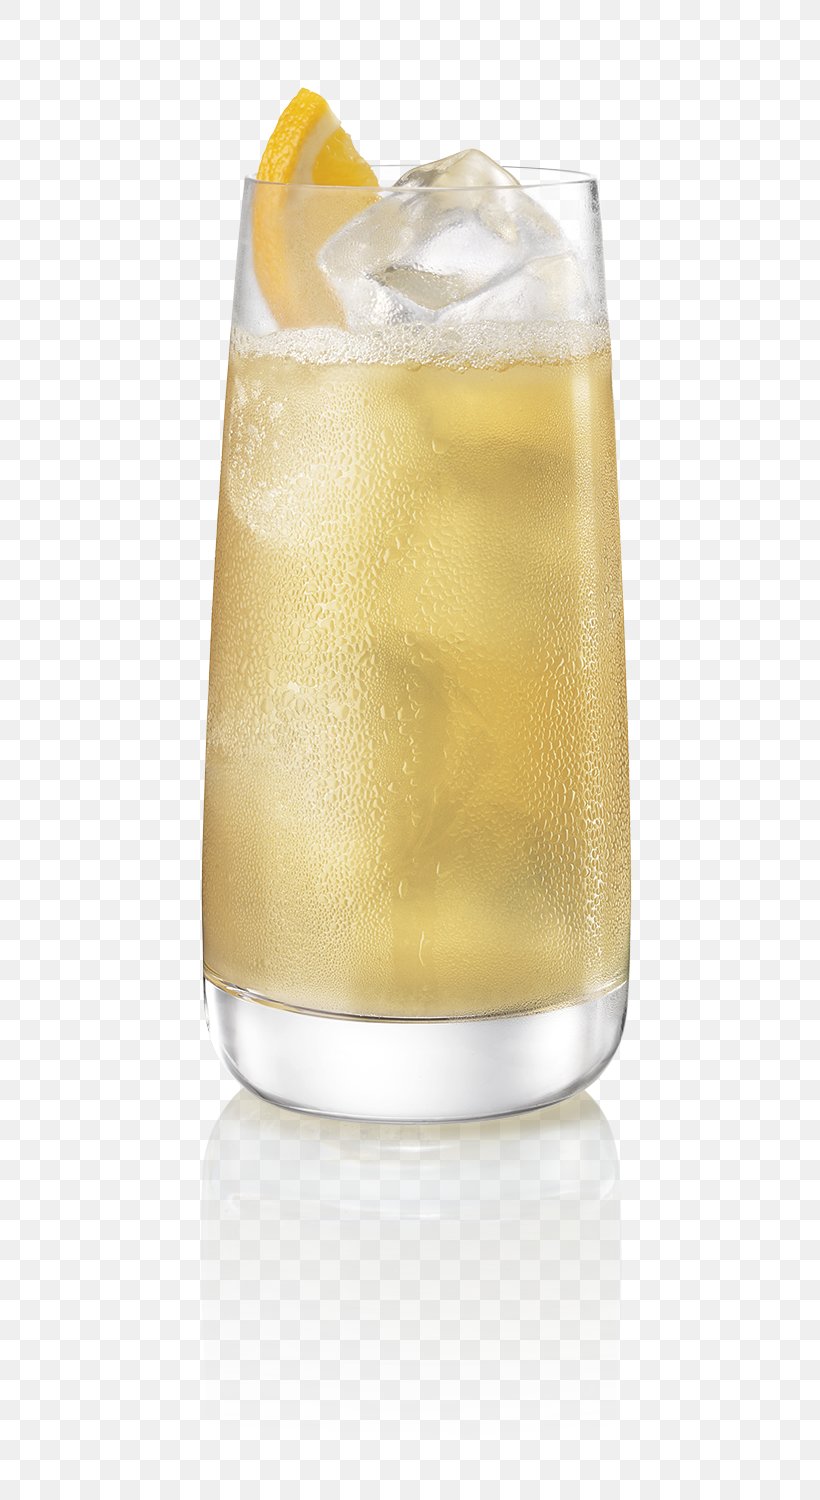 Gin And Tonic Harvey Wallbanger Whiskey Sour Vodka Tonic Tonic Water, PNG, 675x1500px, Gin And Tonic, Cocktail, Drink, Flavor, Gin Download Free